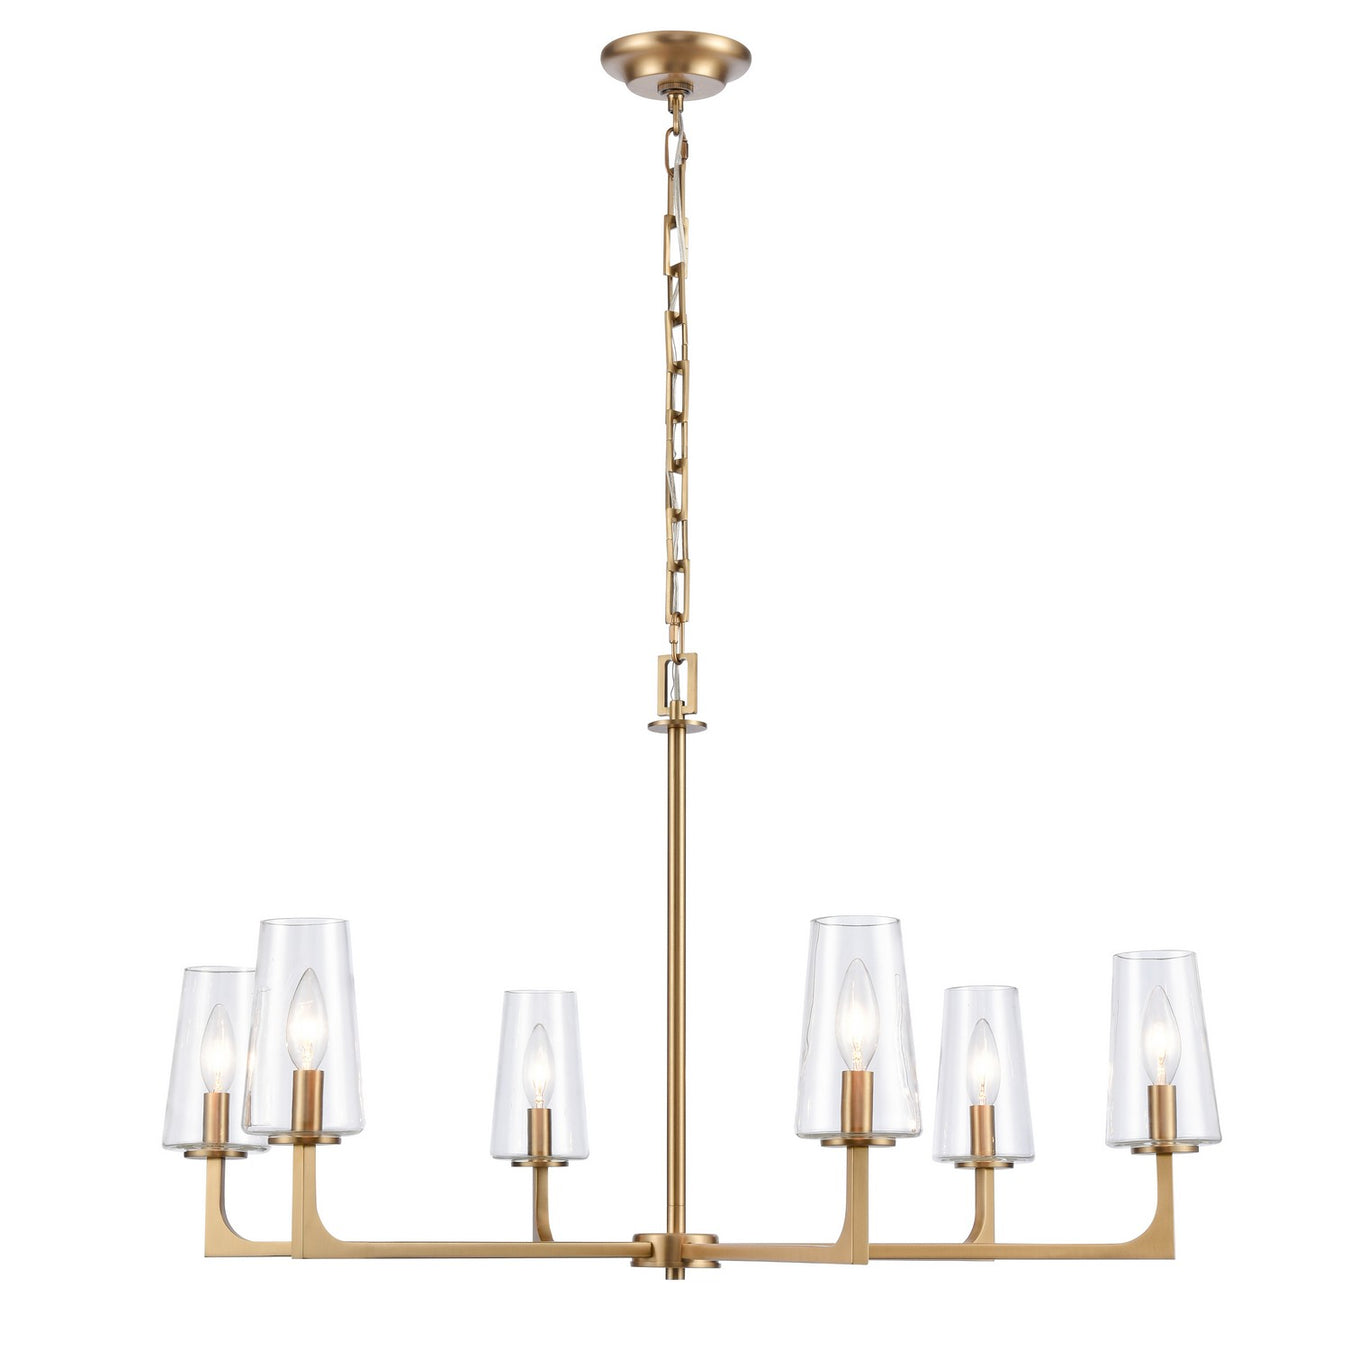 Fitzroy Six Light Chandelier in Lacquered Brass